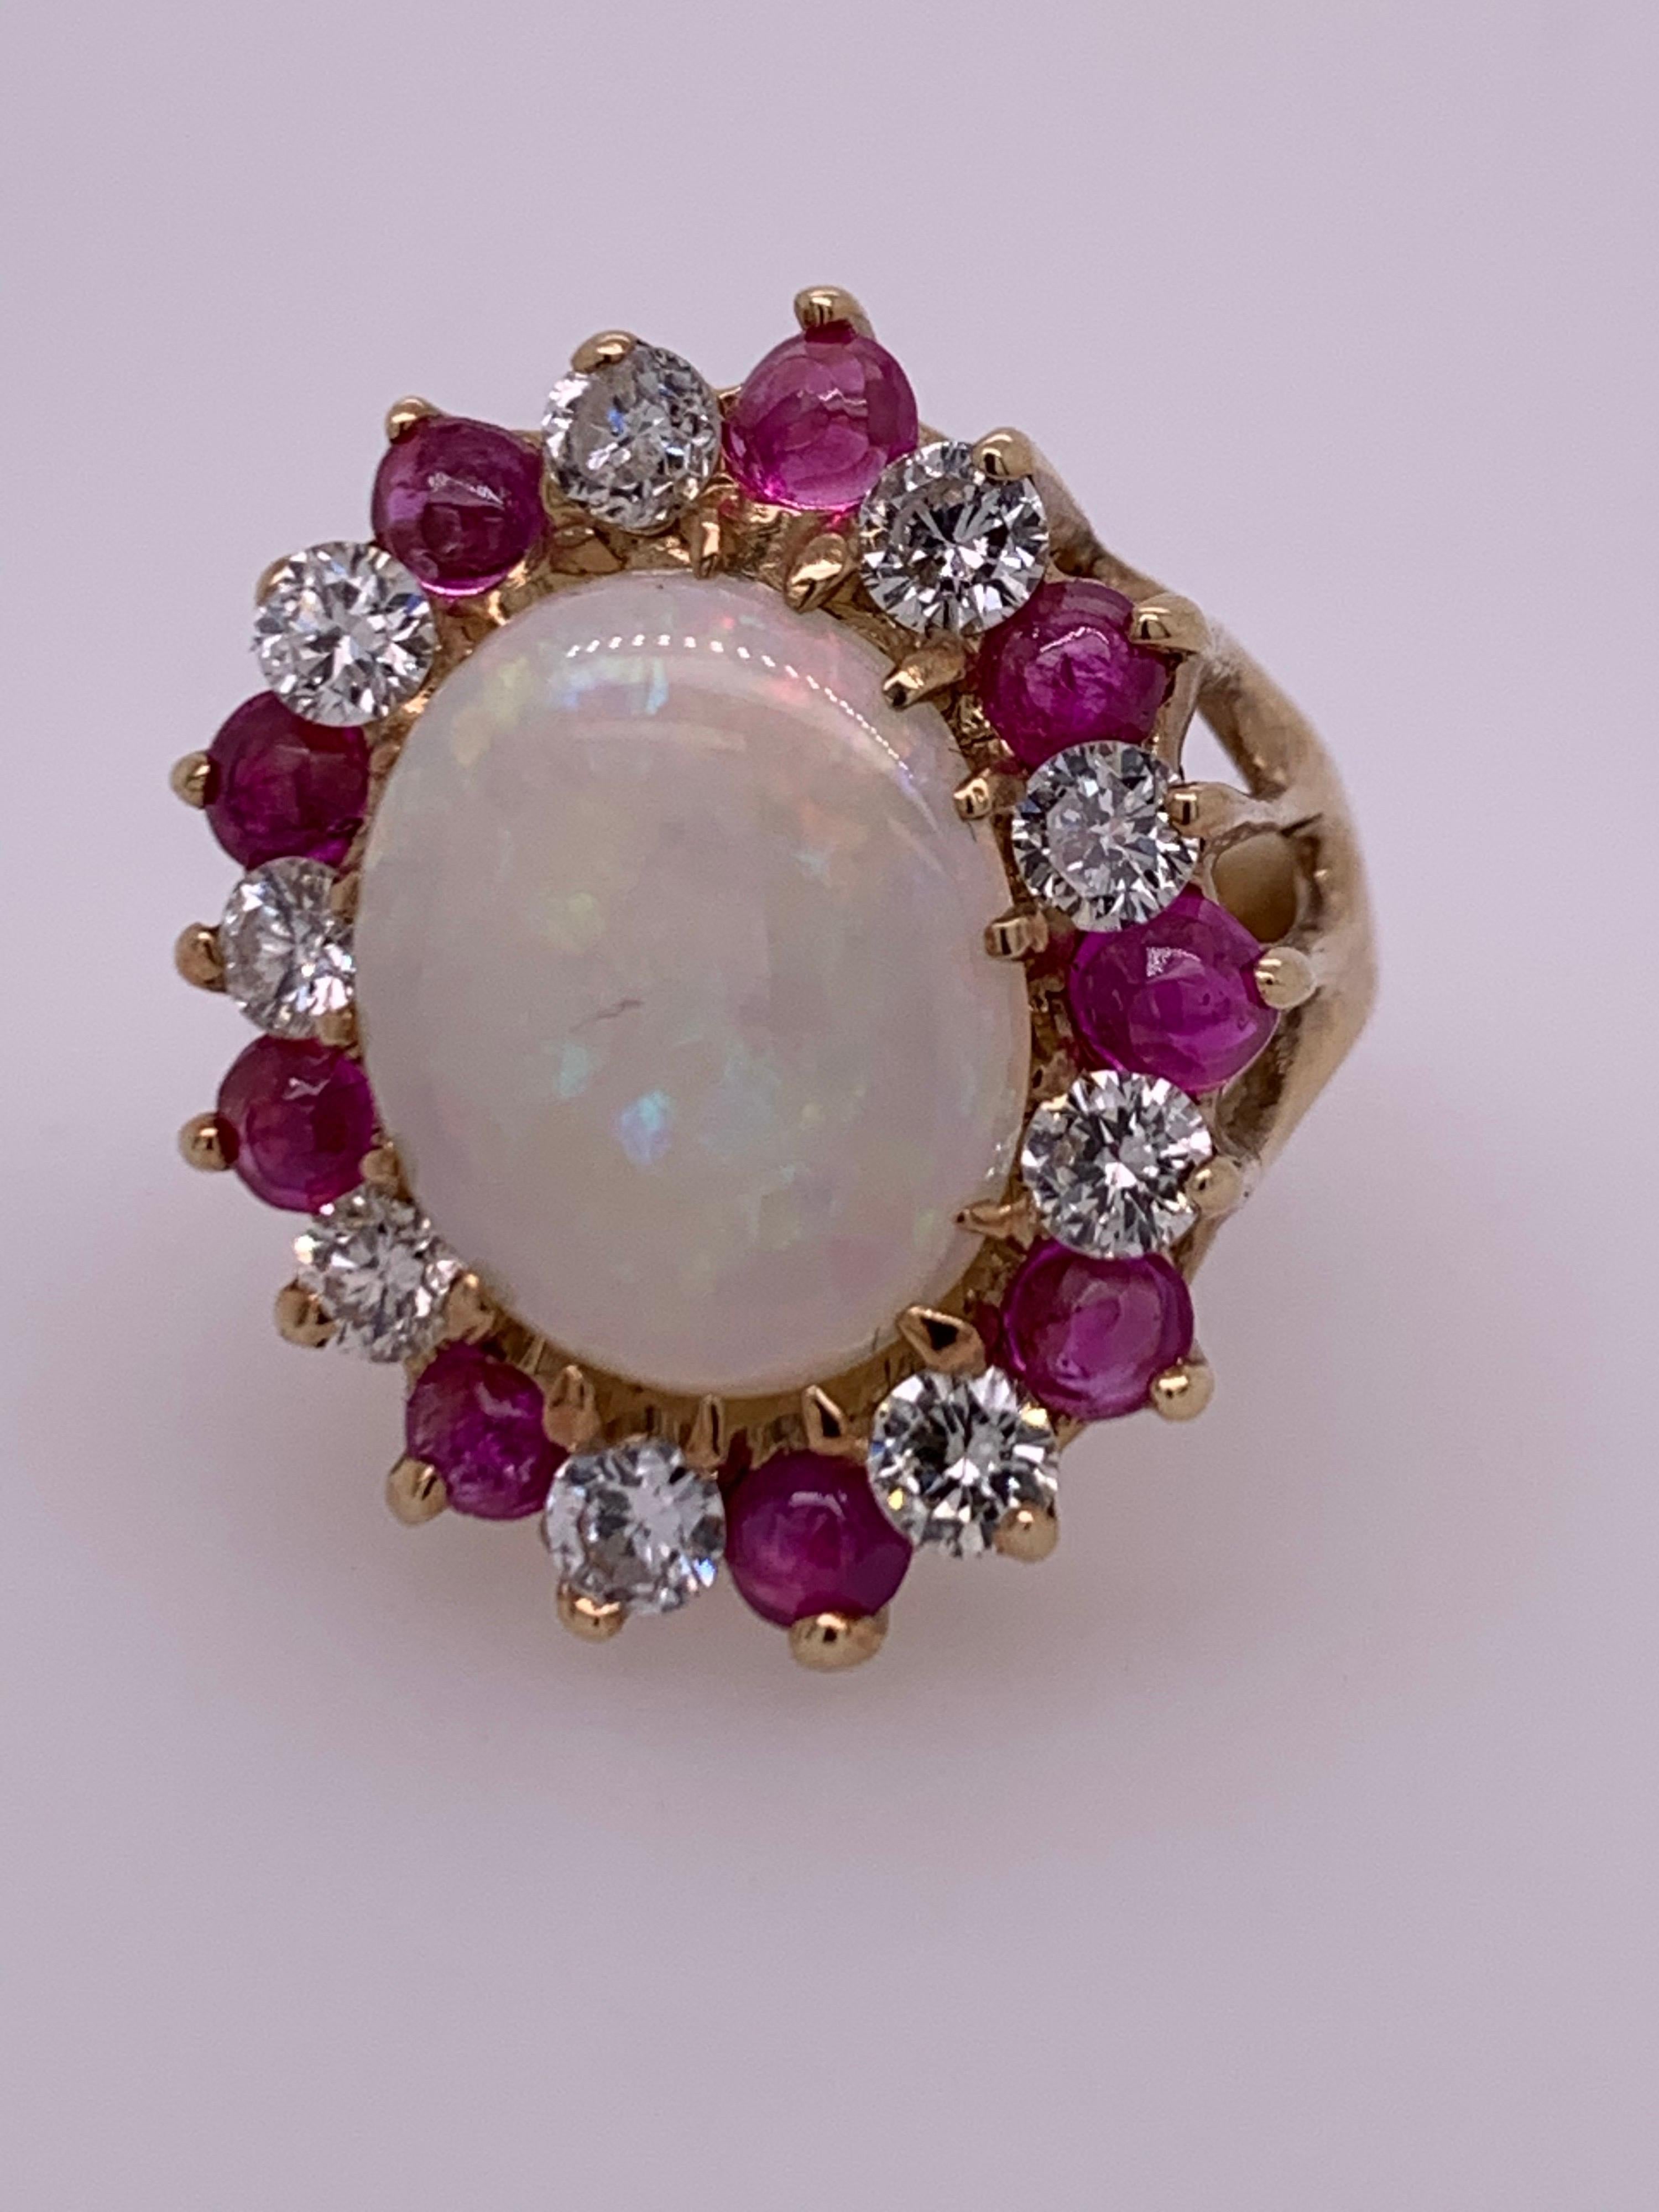 Retro Gold Ring Approx 6.22 Carat Natural Opal Diamond Ruby Gem Stone circa 1960 For Sale 2